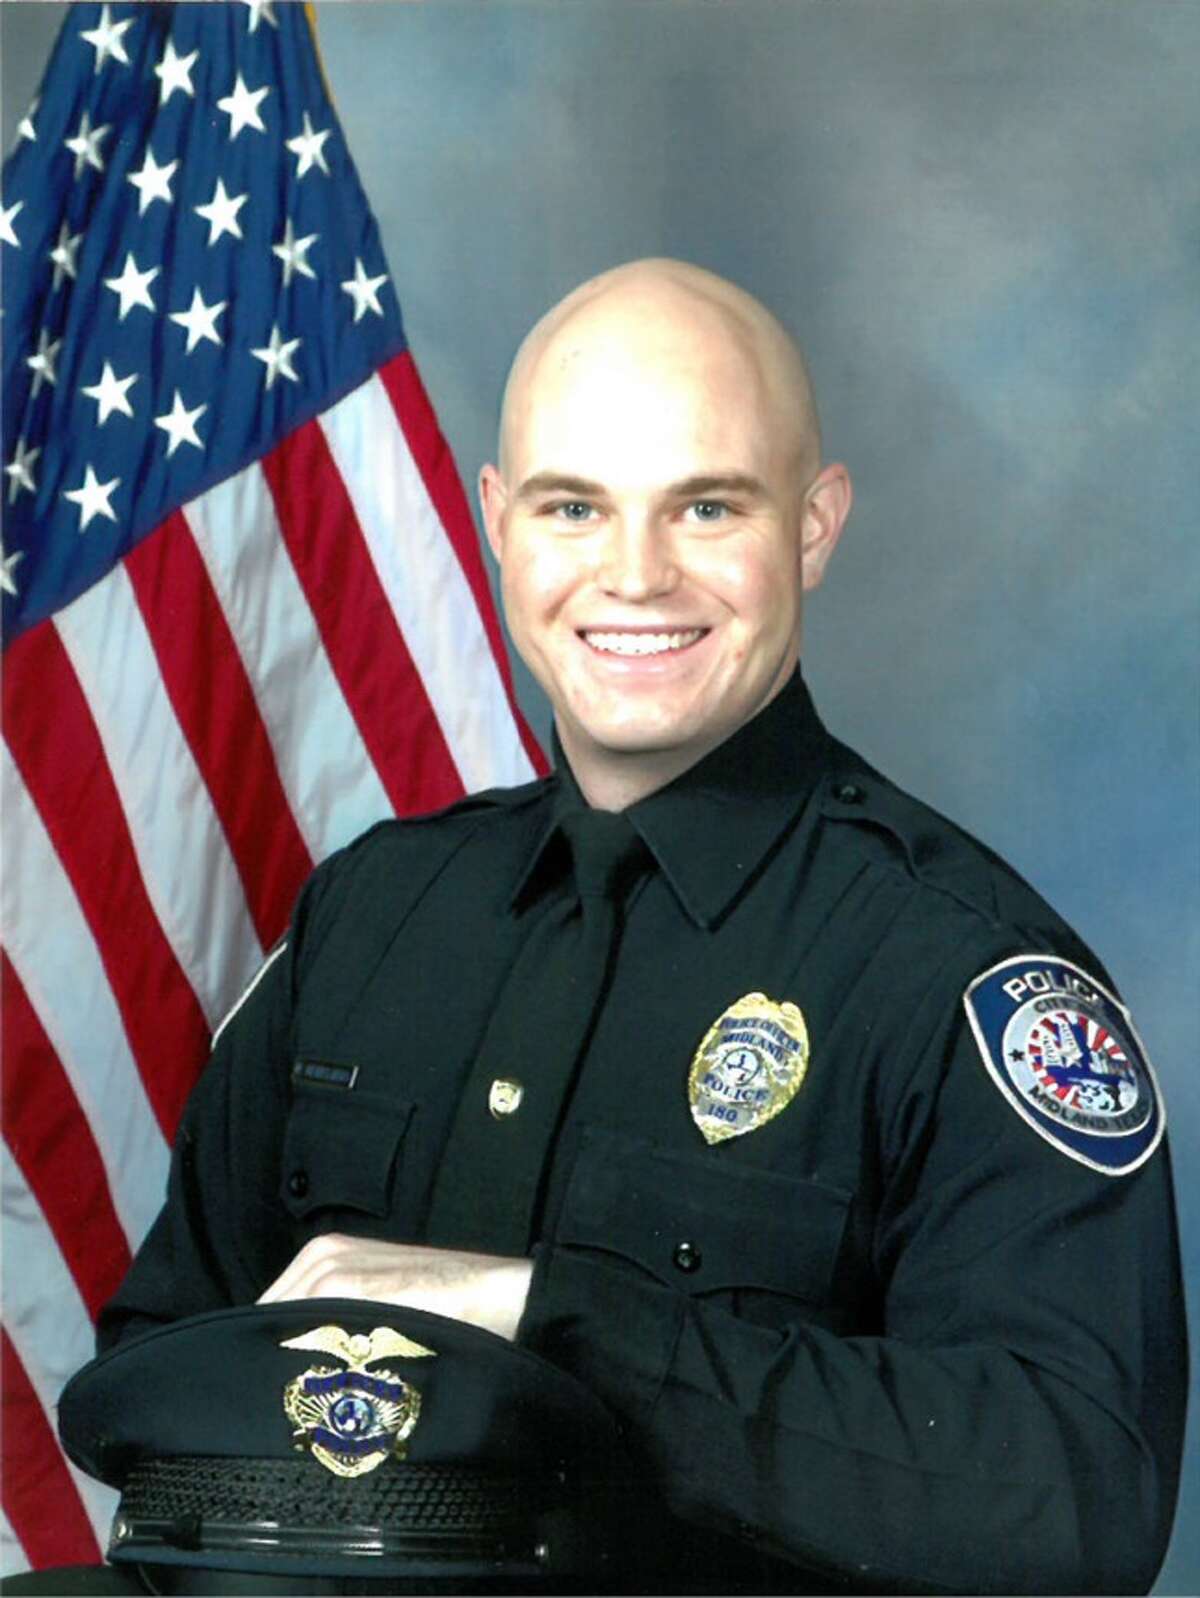 Midland Police Department Officer Nathan Heidelberg died this morning after being shot while responding to an alarm at a local residence, according to the city’s spokesman.